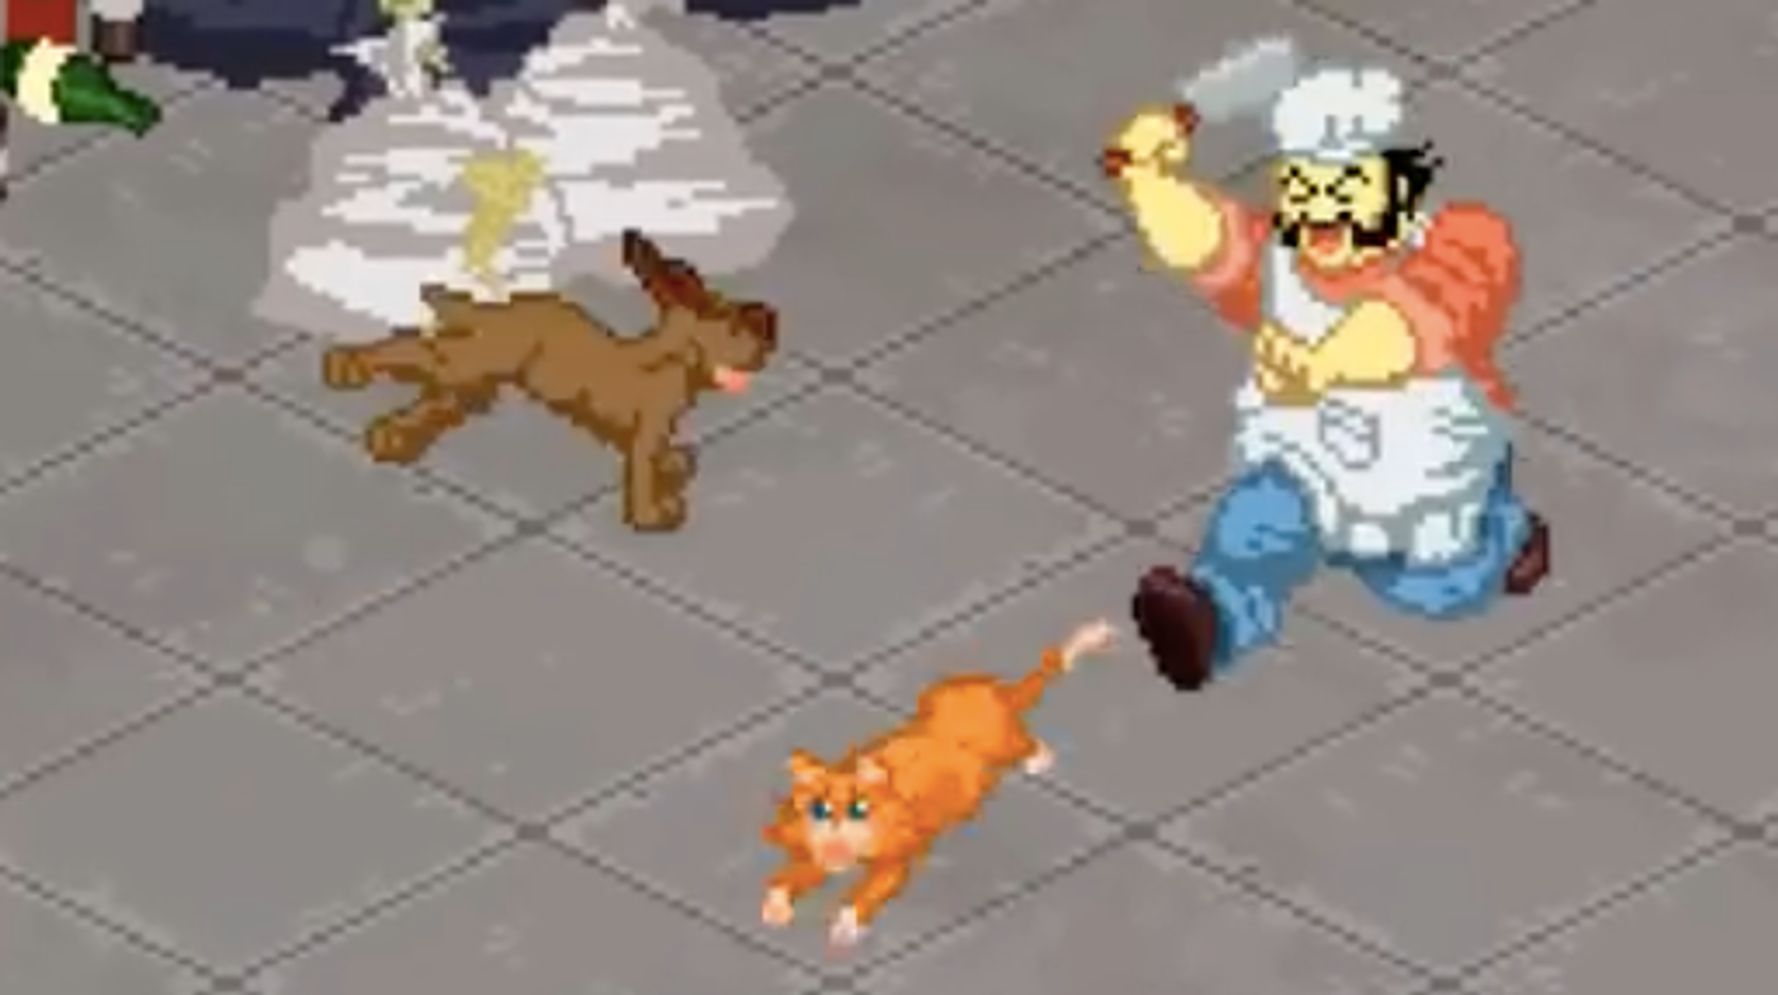 Developers Pull Plug On Racist 'Dirty Chinese Restaurant' Video Game |  HuffPost UK News